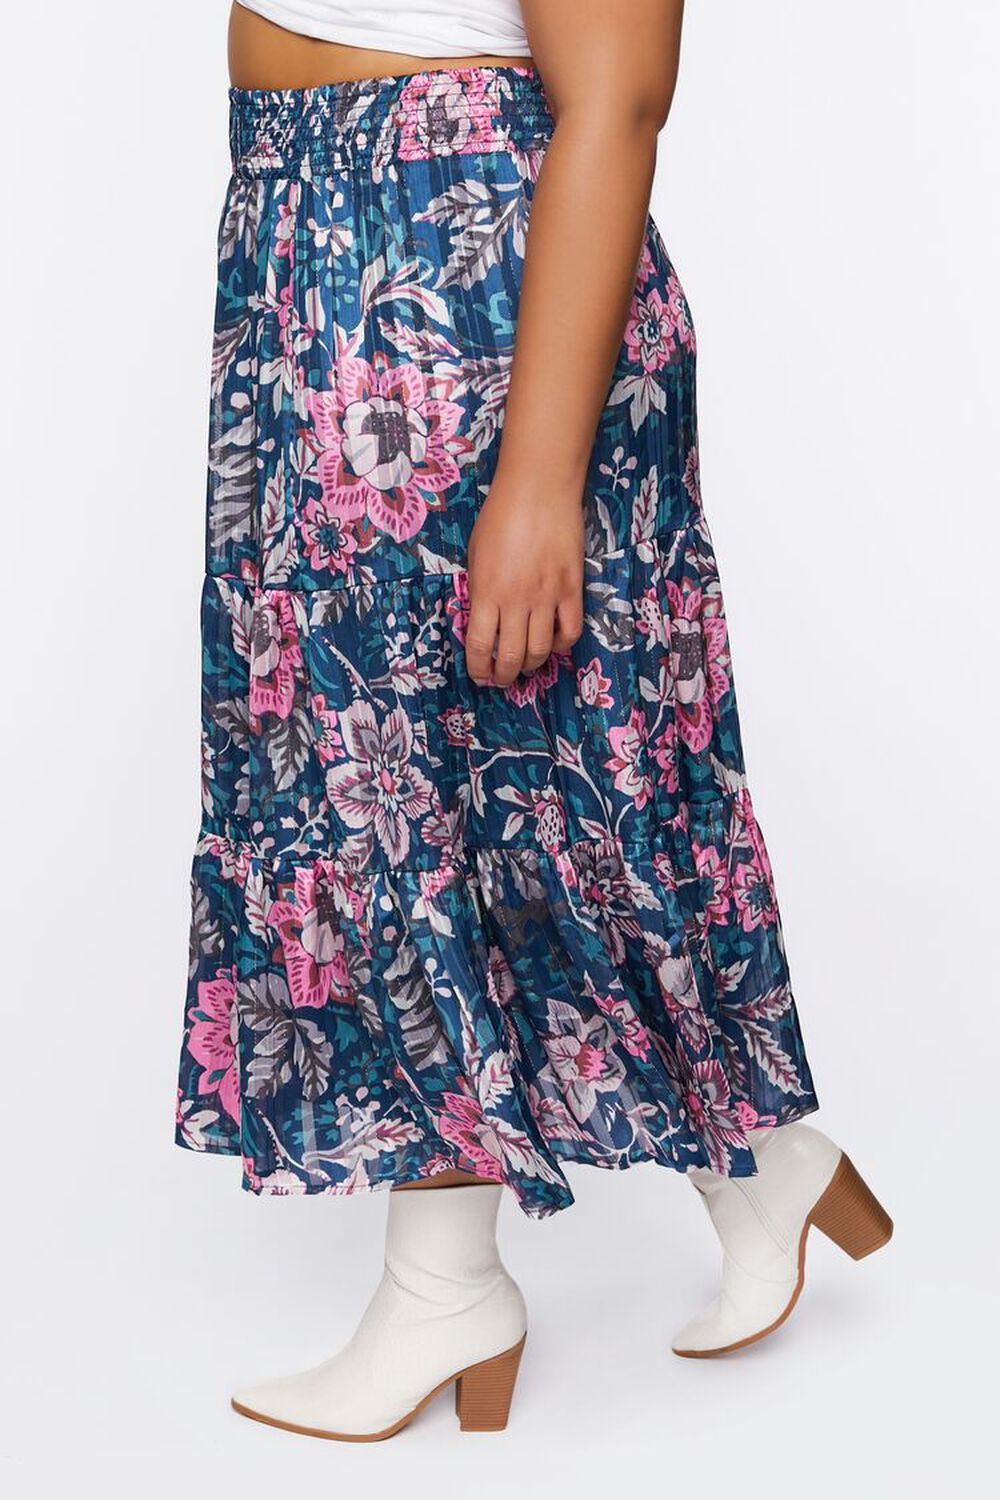 BLUE/MULTI Plus Size Floral Print Tiered Maxi Skirt, image 3